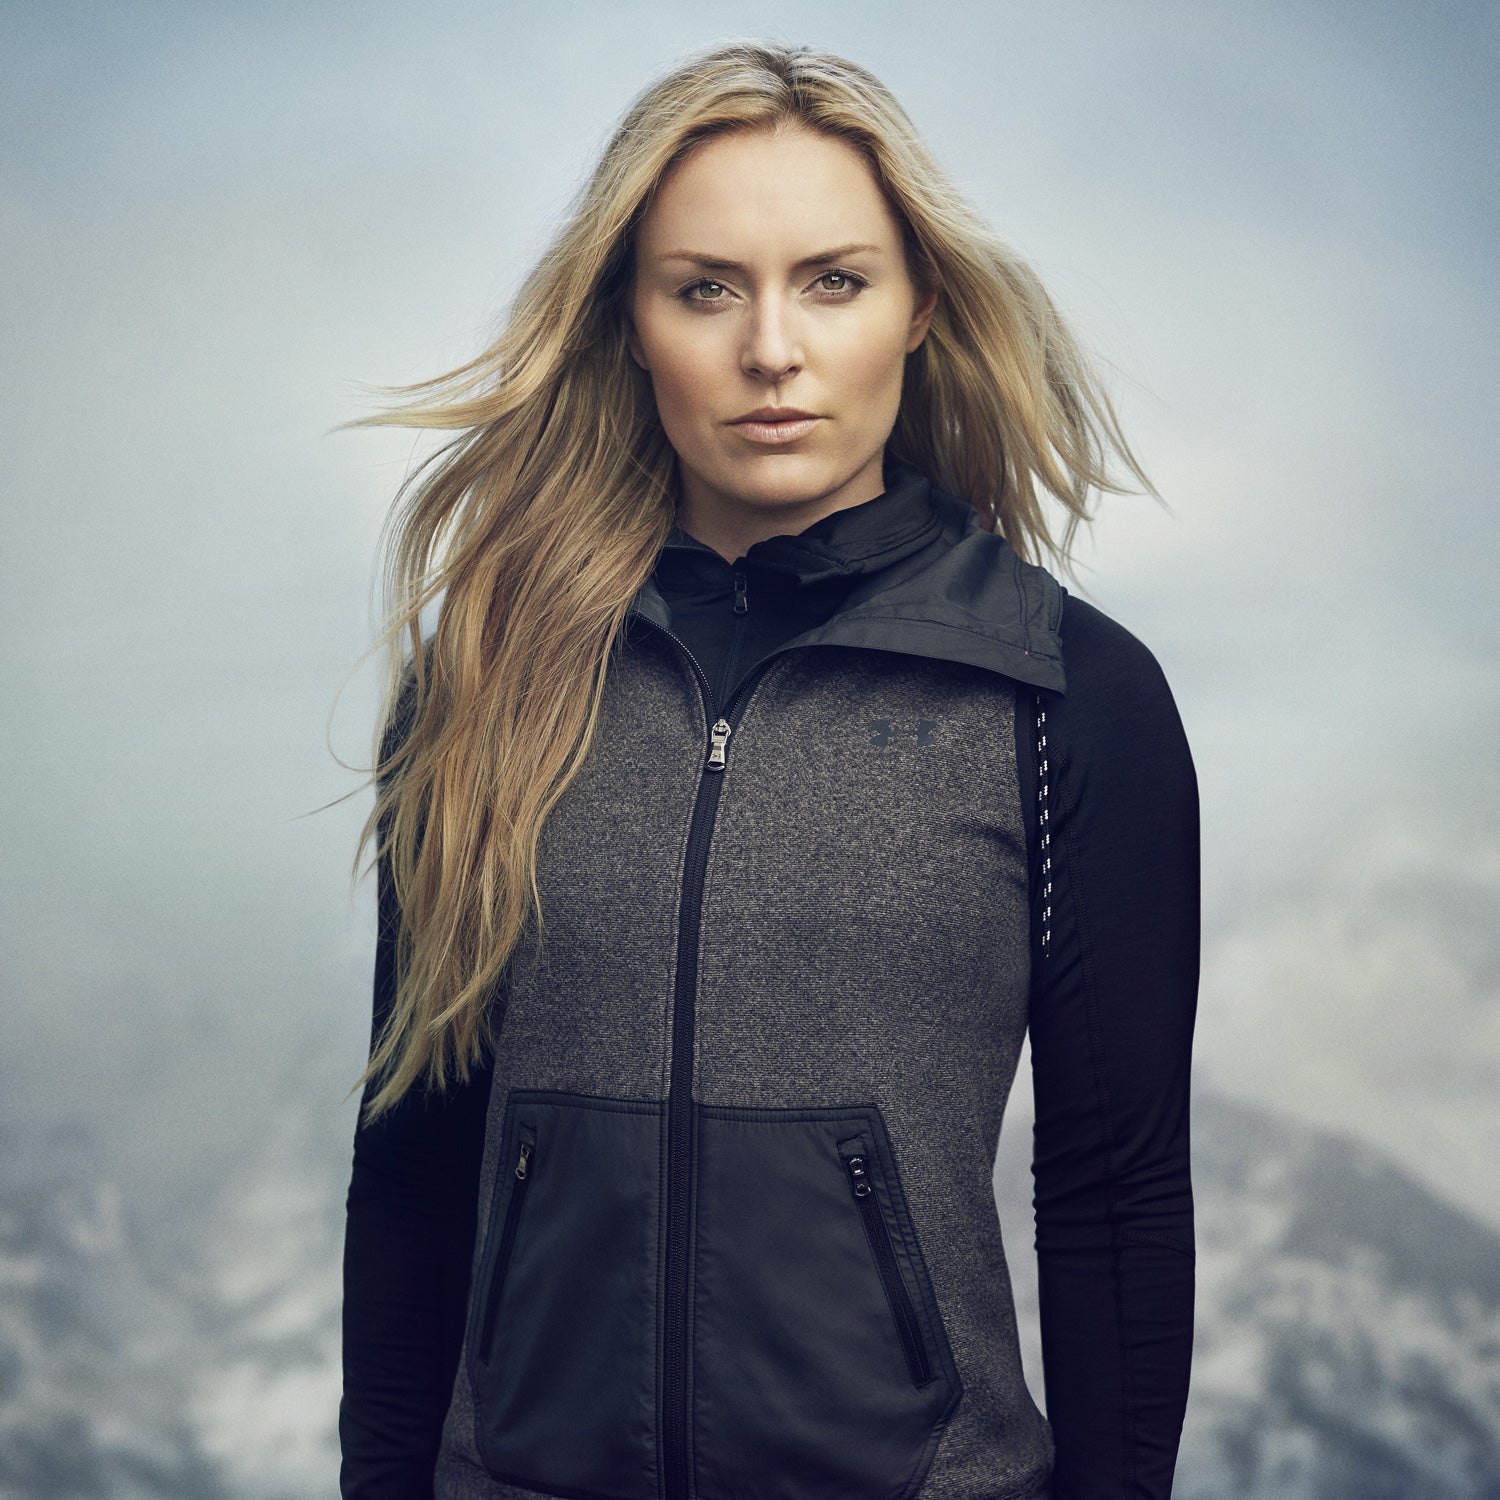 Armour's Bid to Clothe Outdoor Athletes - Outside